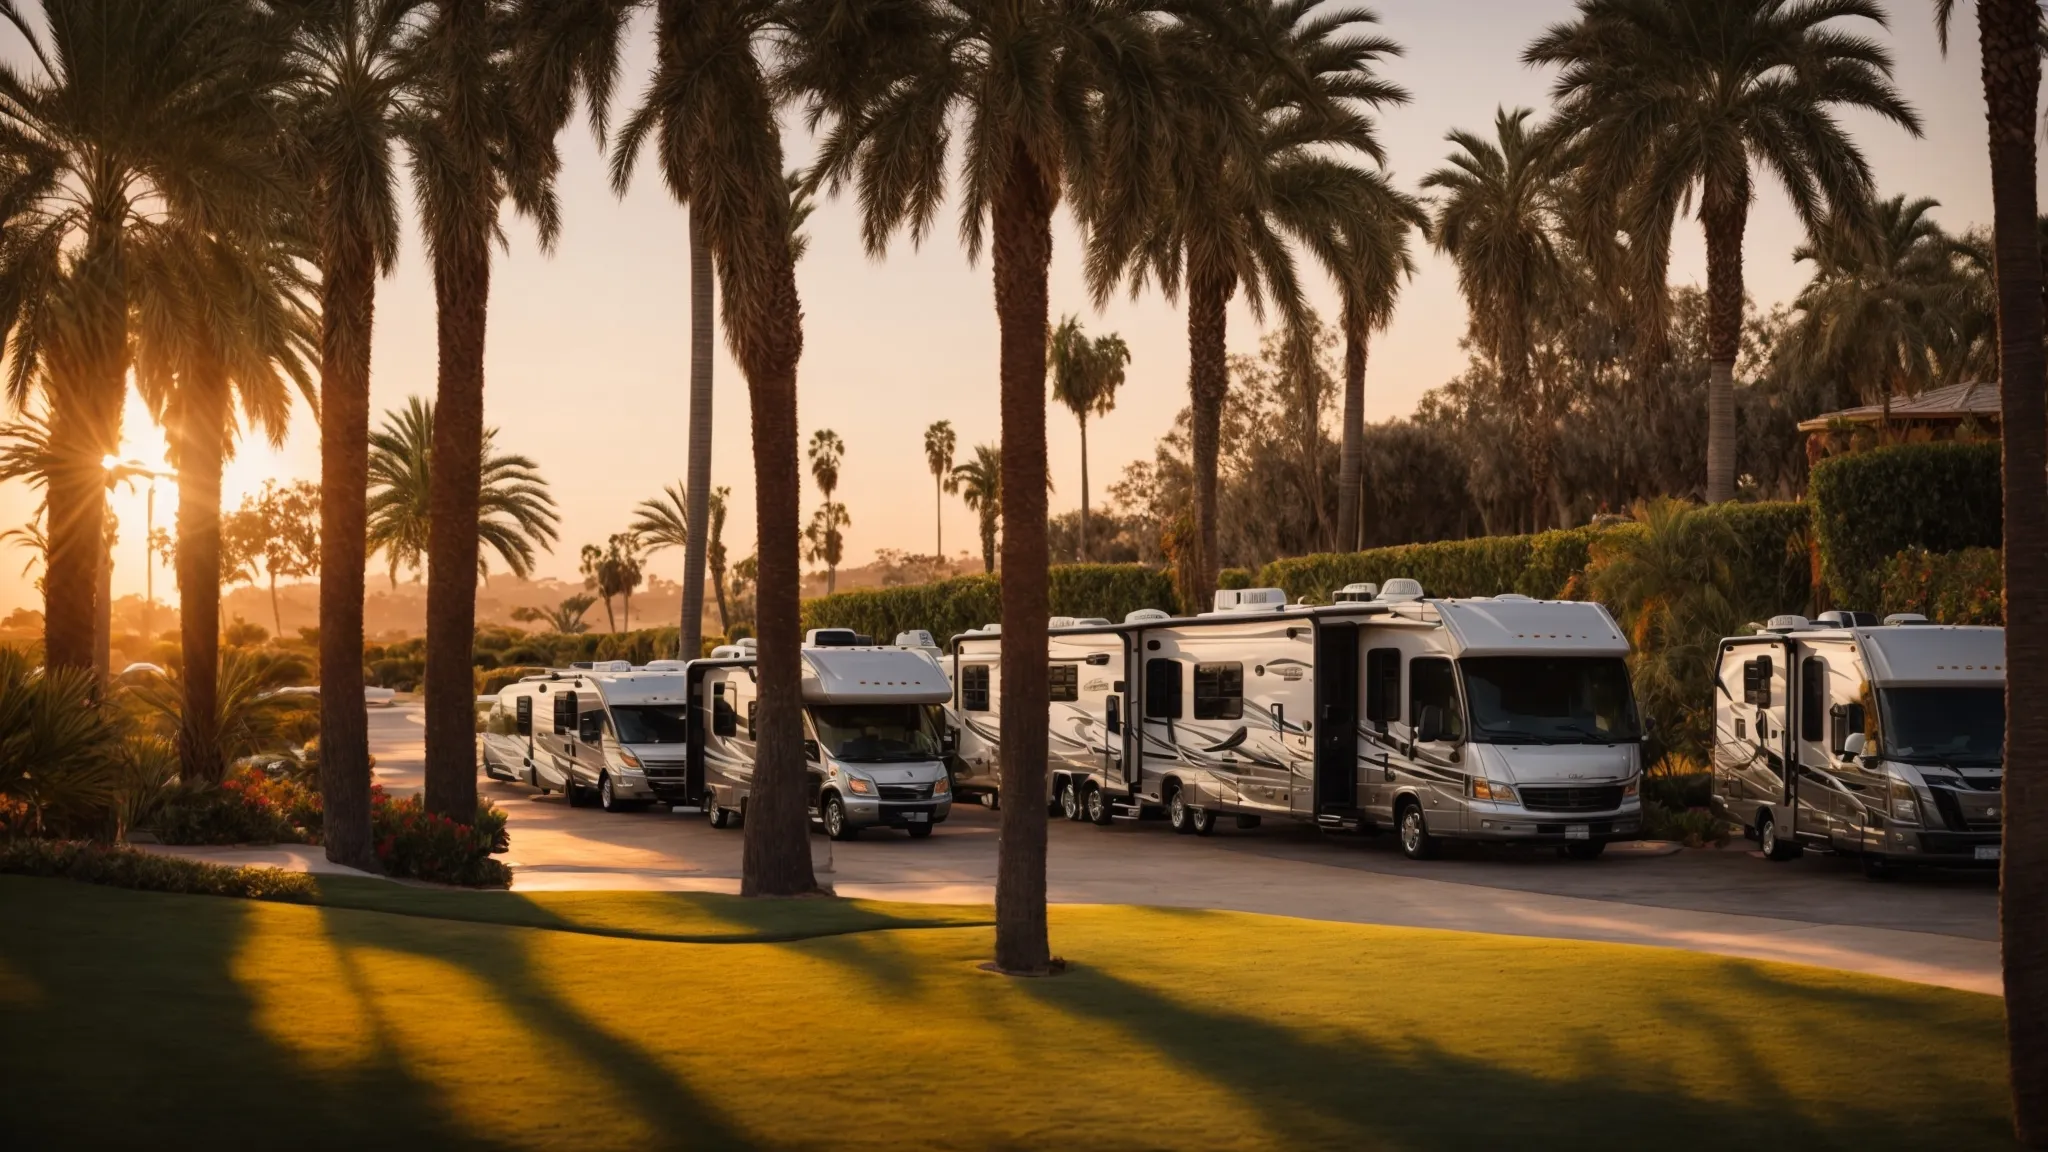 sunset over the lush grounds of a high-end rv resort near the water in san diego, with deluxe motorhomes parked amid palm trees.